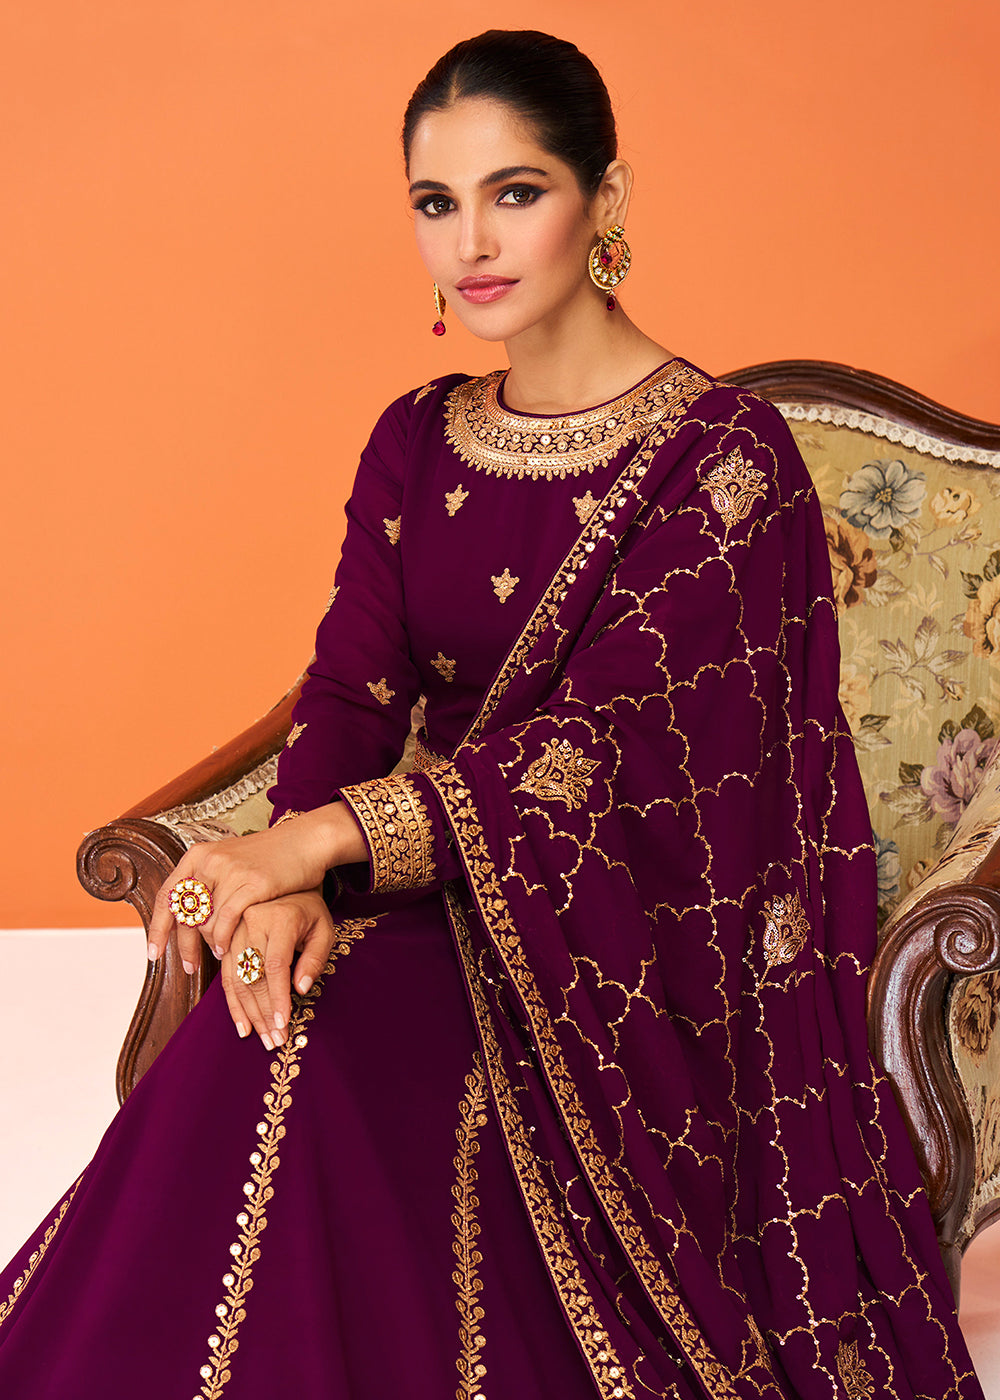 Buy Now Plum Purple Festive Wear Embroidered Anarkali Suit Online in USA, UK, Australia, New Zealand, Canada & Worldwide at Empress Clothing.